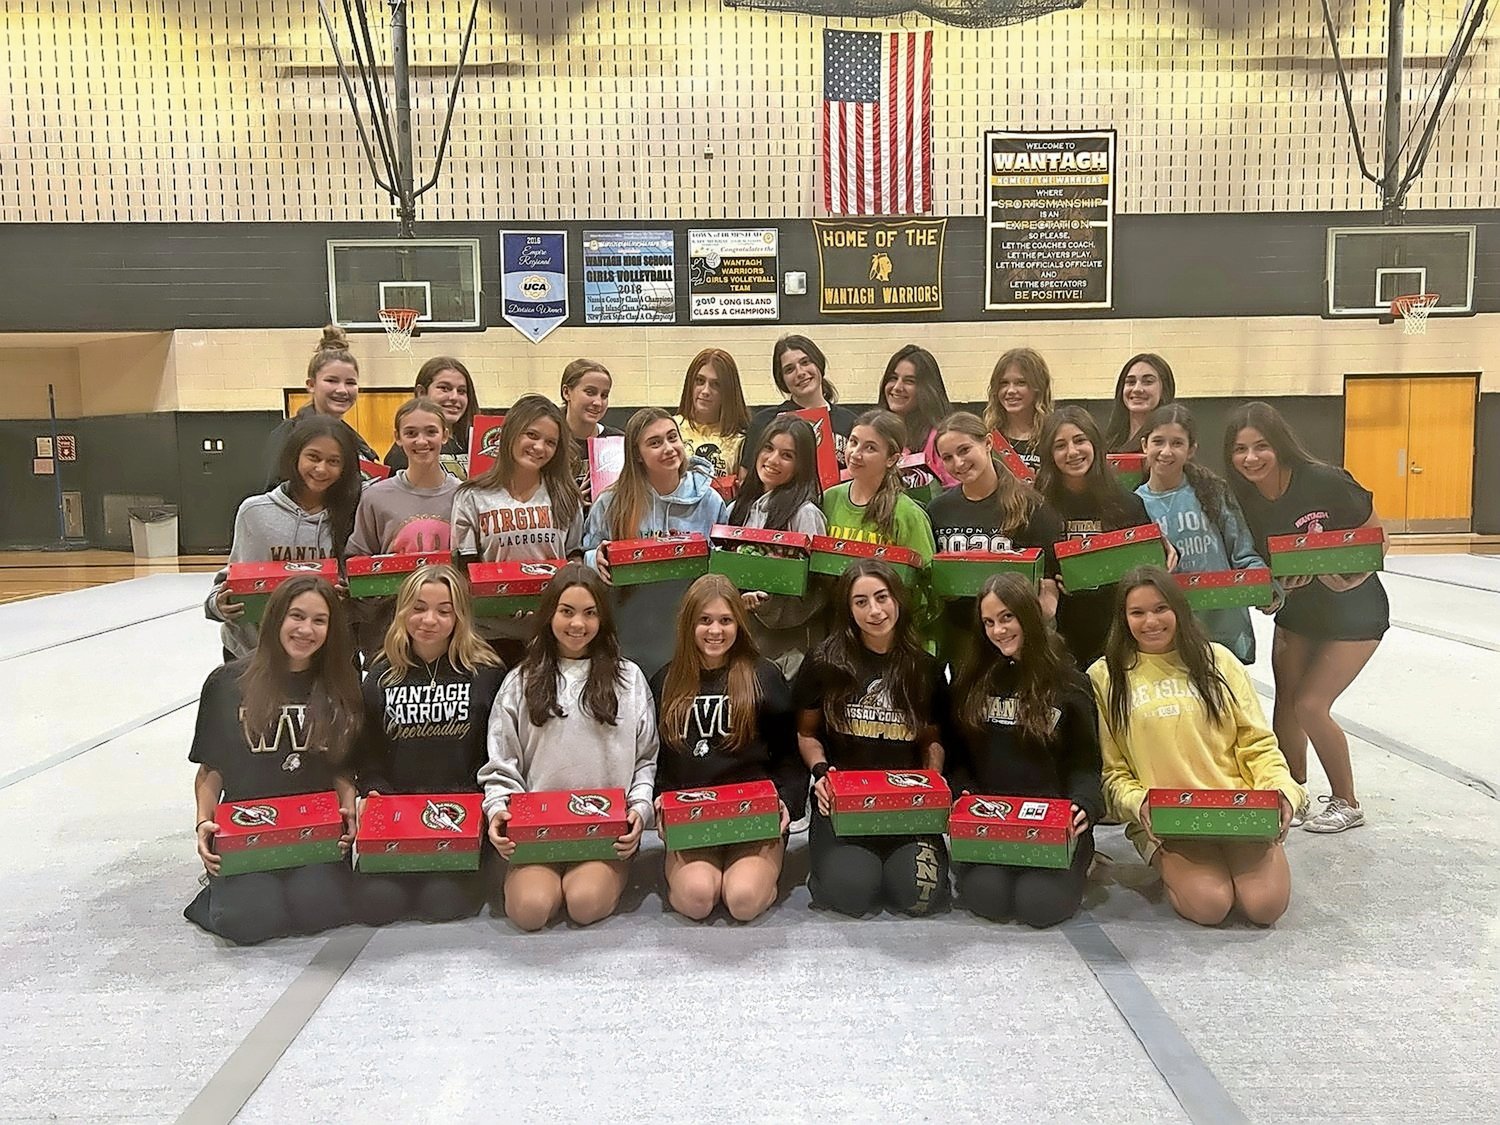 In addition to competing and performing at football games, the Wantagh cheer team took part in a toy drive during the holidays called Operation Christmas Child.